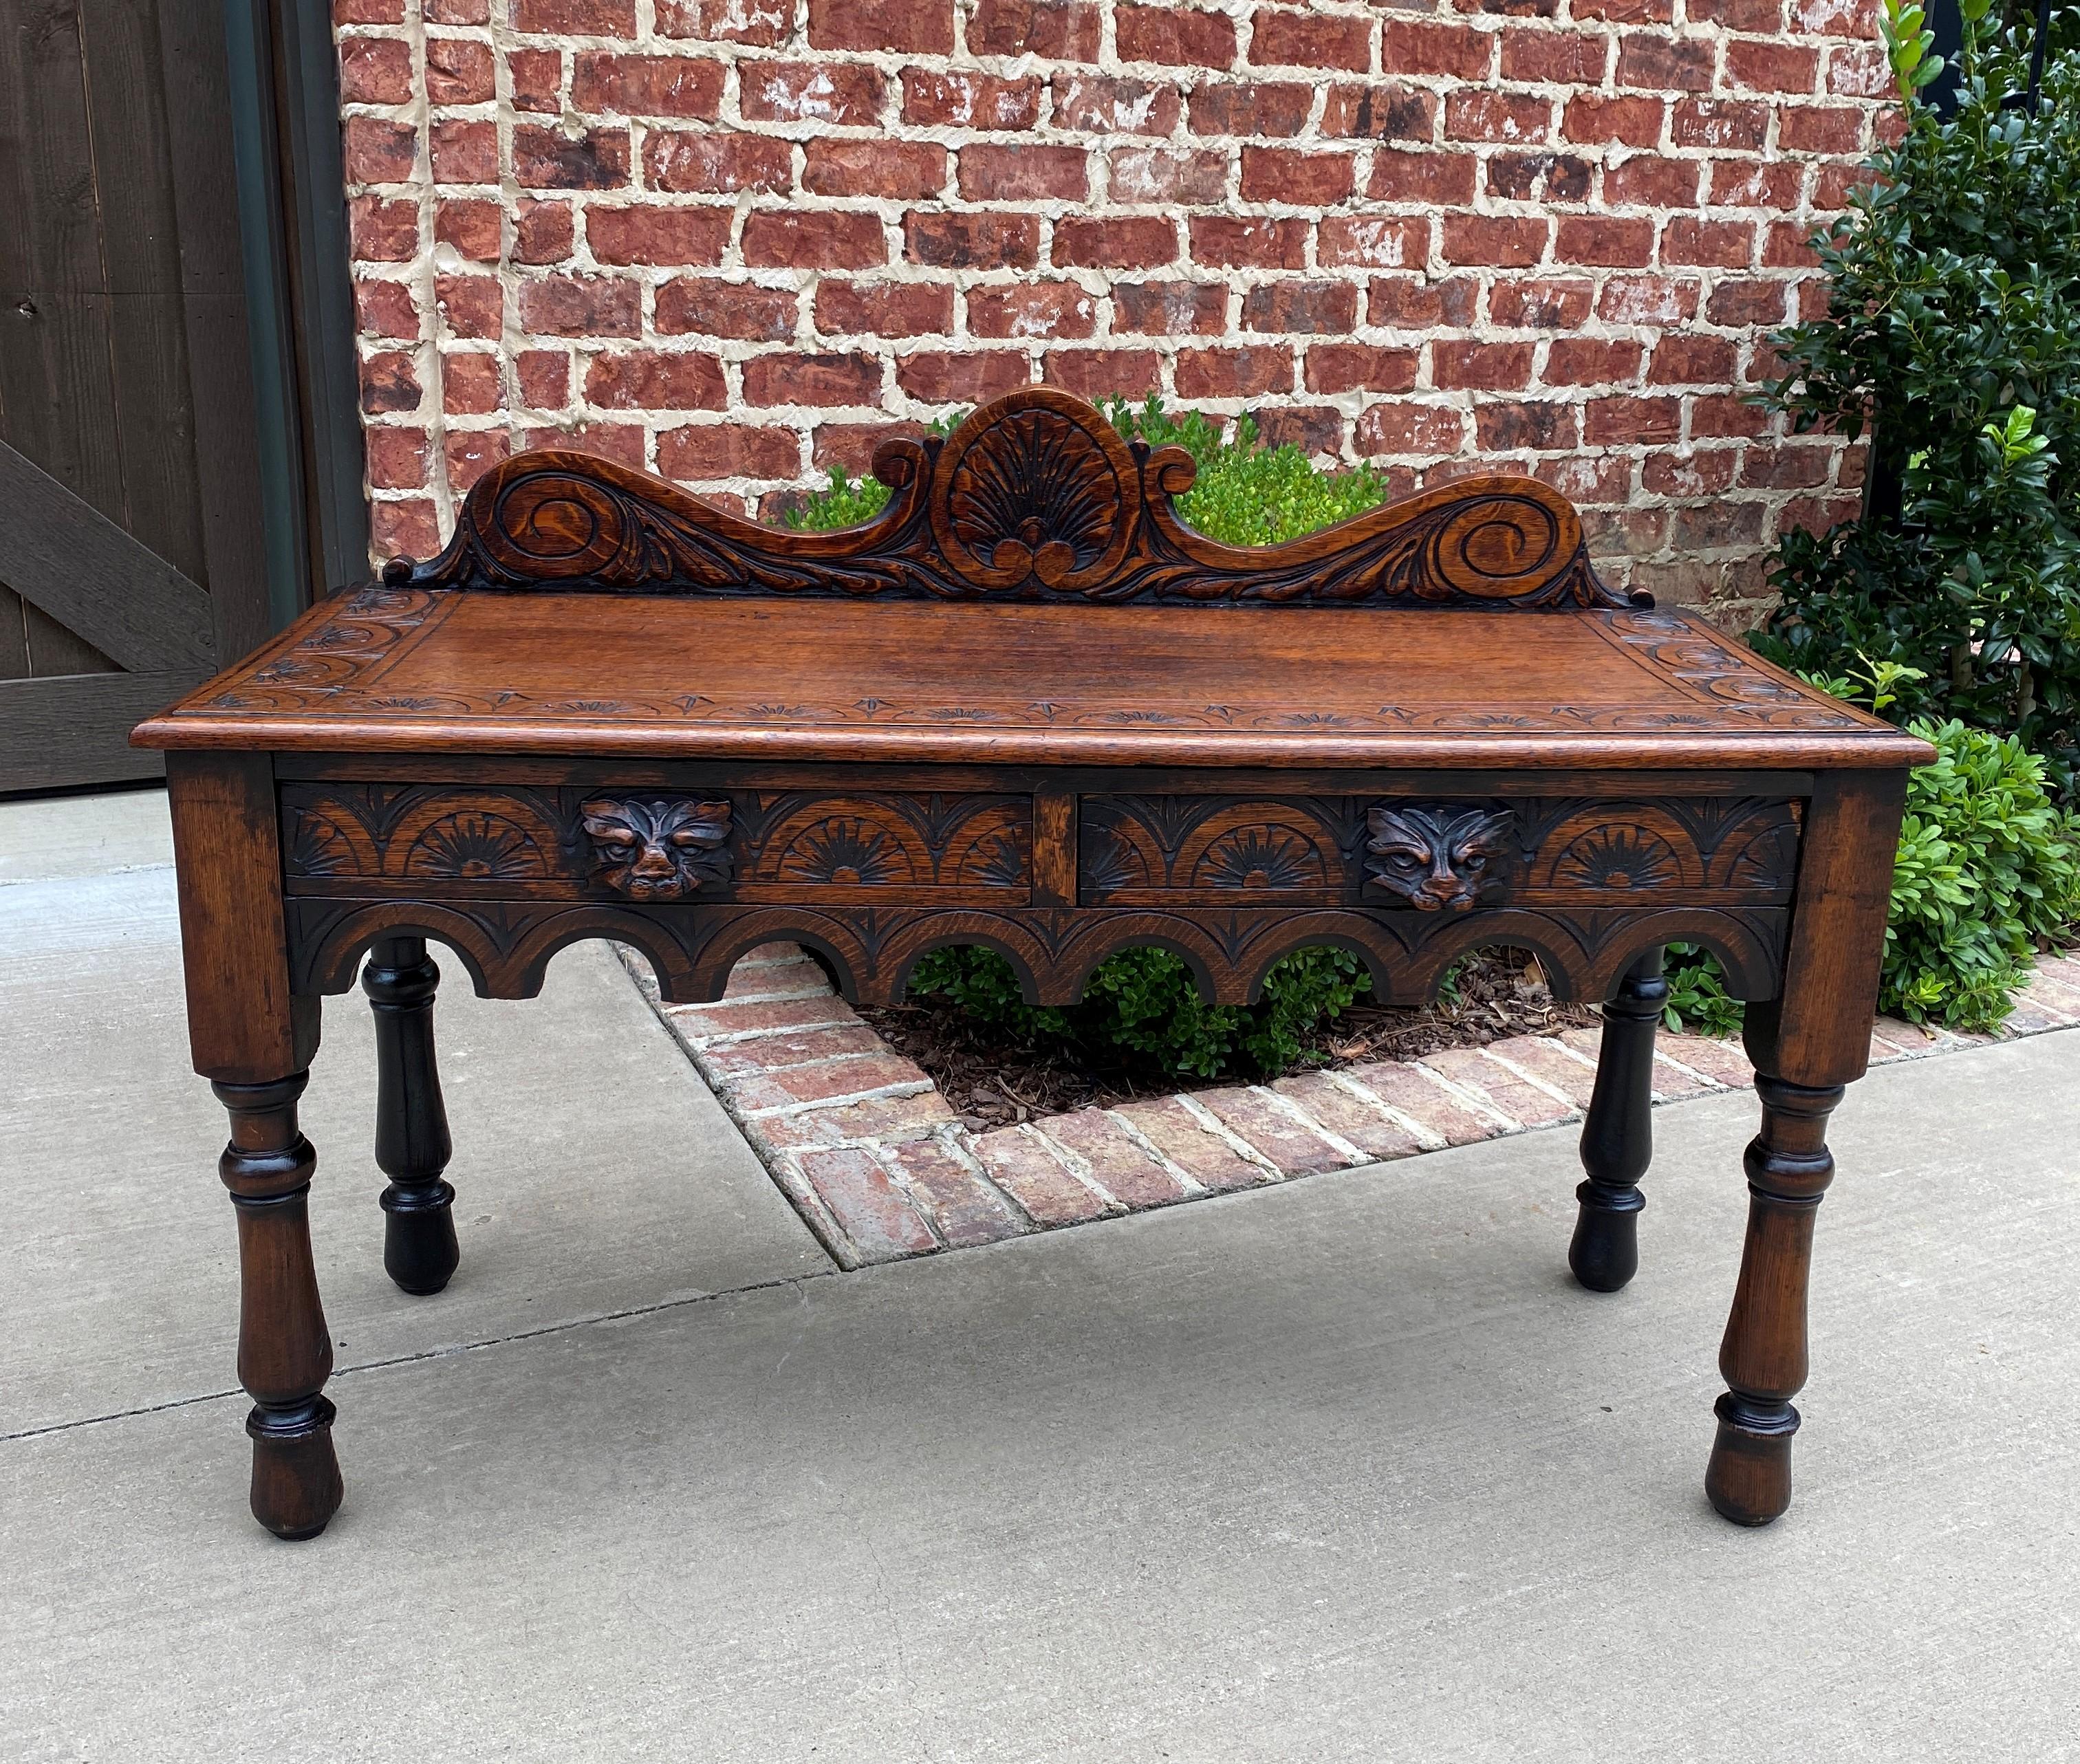 Charming antique English oak window seat or end-of-bed bench~~Gothic Revival~~two drawers ~~c. 1900

Classic British flair decorator piece~~NICELY CARVED with Gothic crown, top and drawer fronts~~two fine, hand-cut dovetailed drawers for